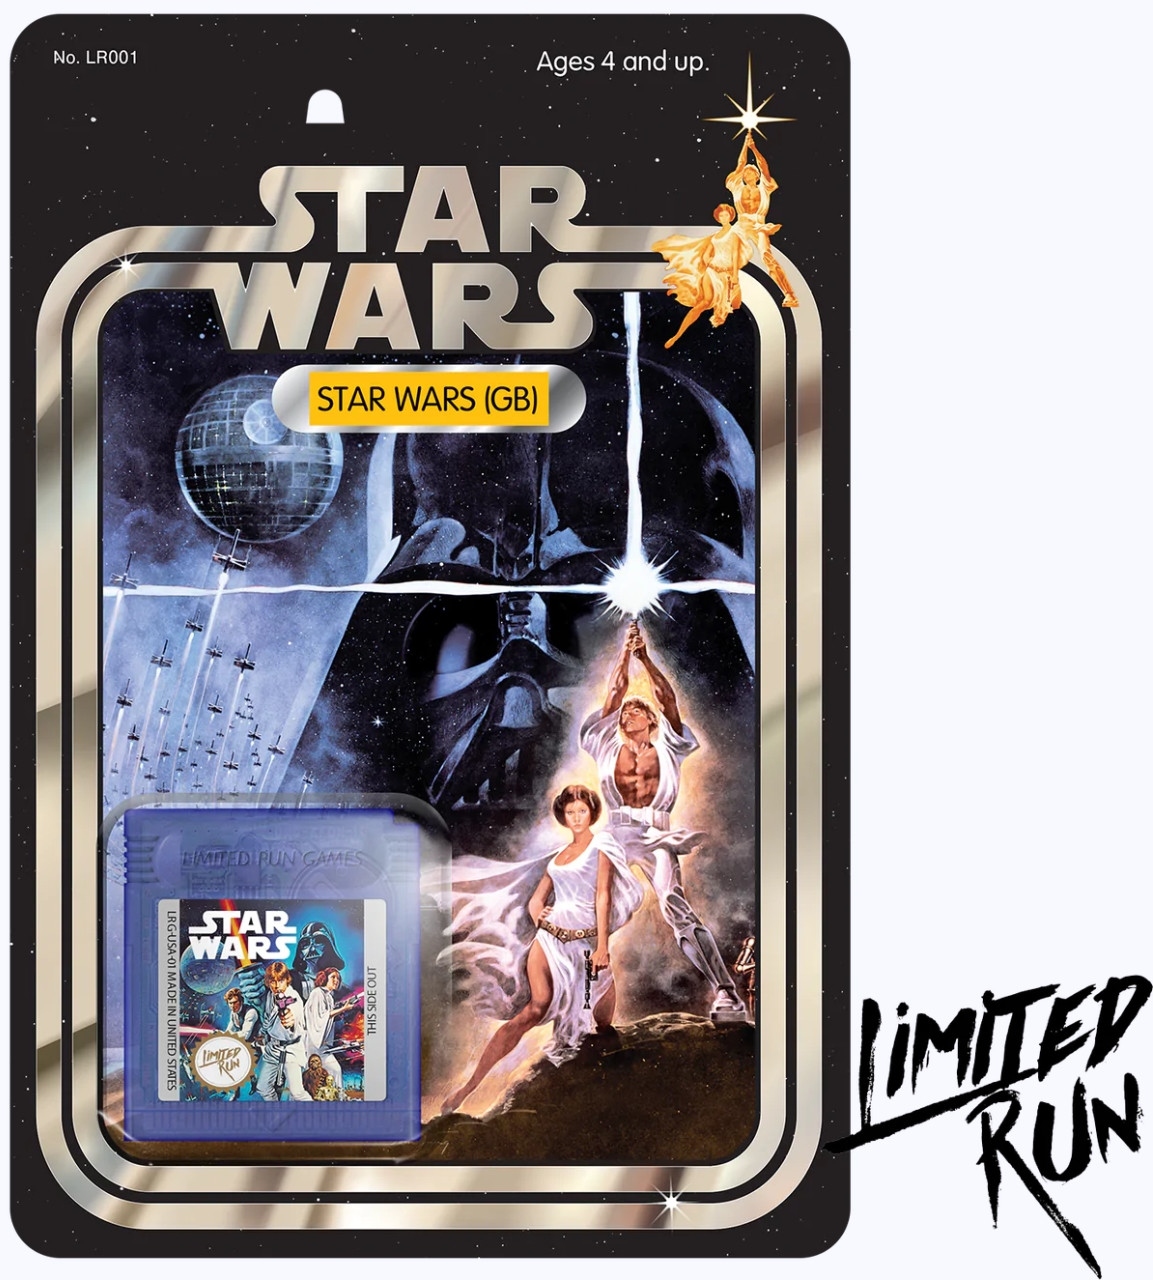 Star Wars - Classic Edition (Limited Run Games)